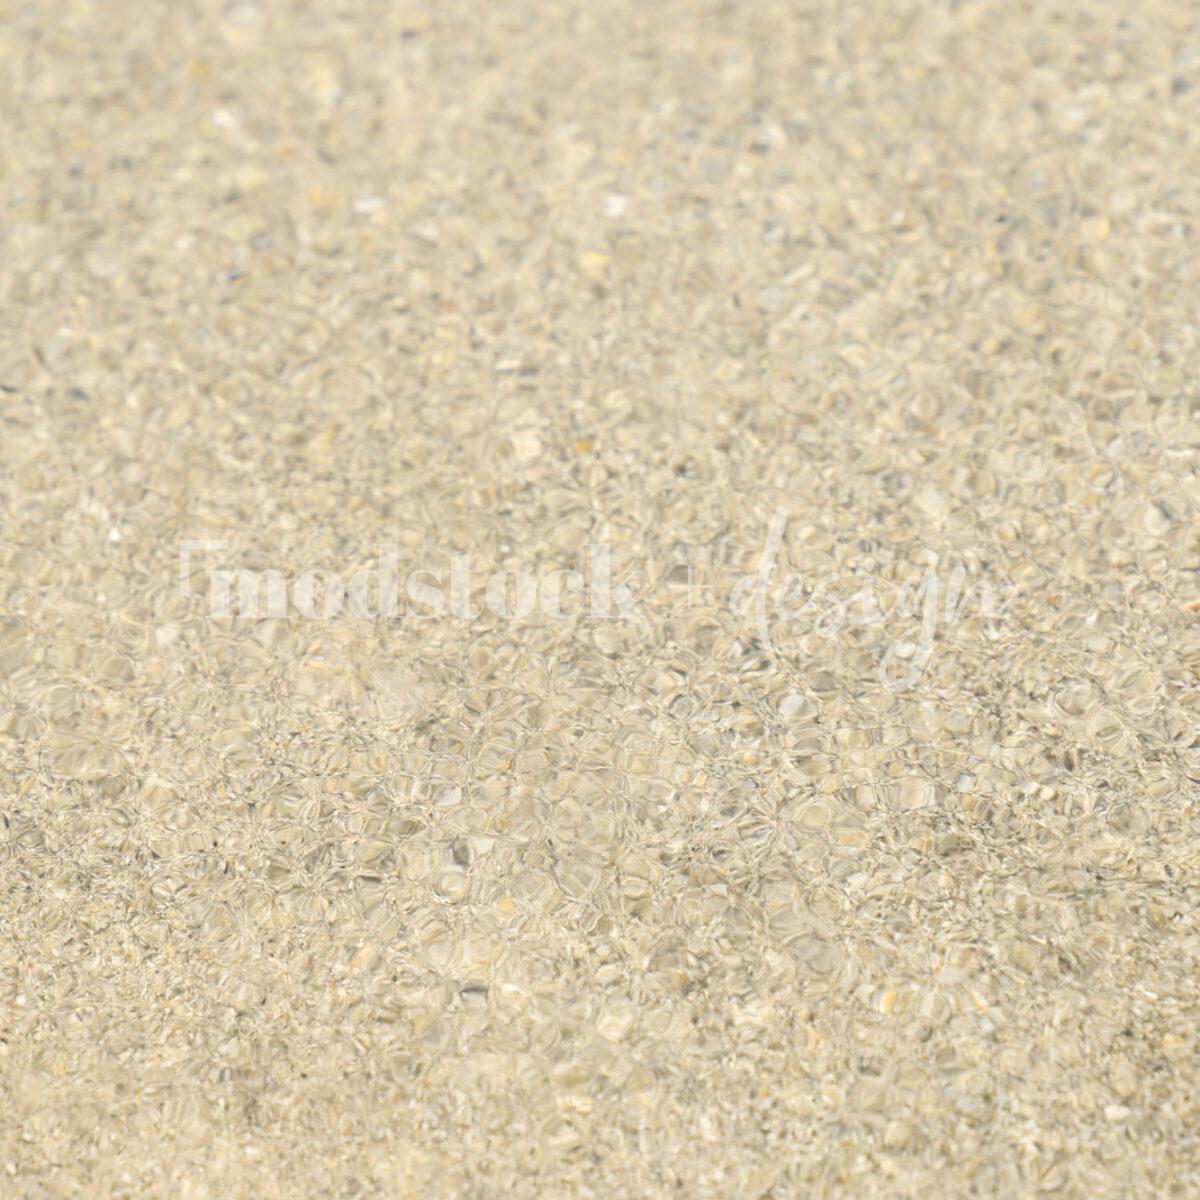 Water and Sand Textures 08